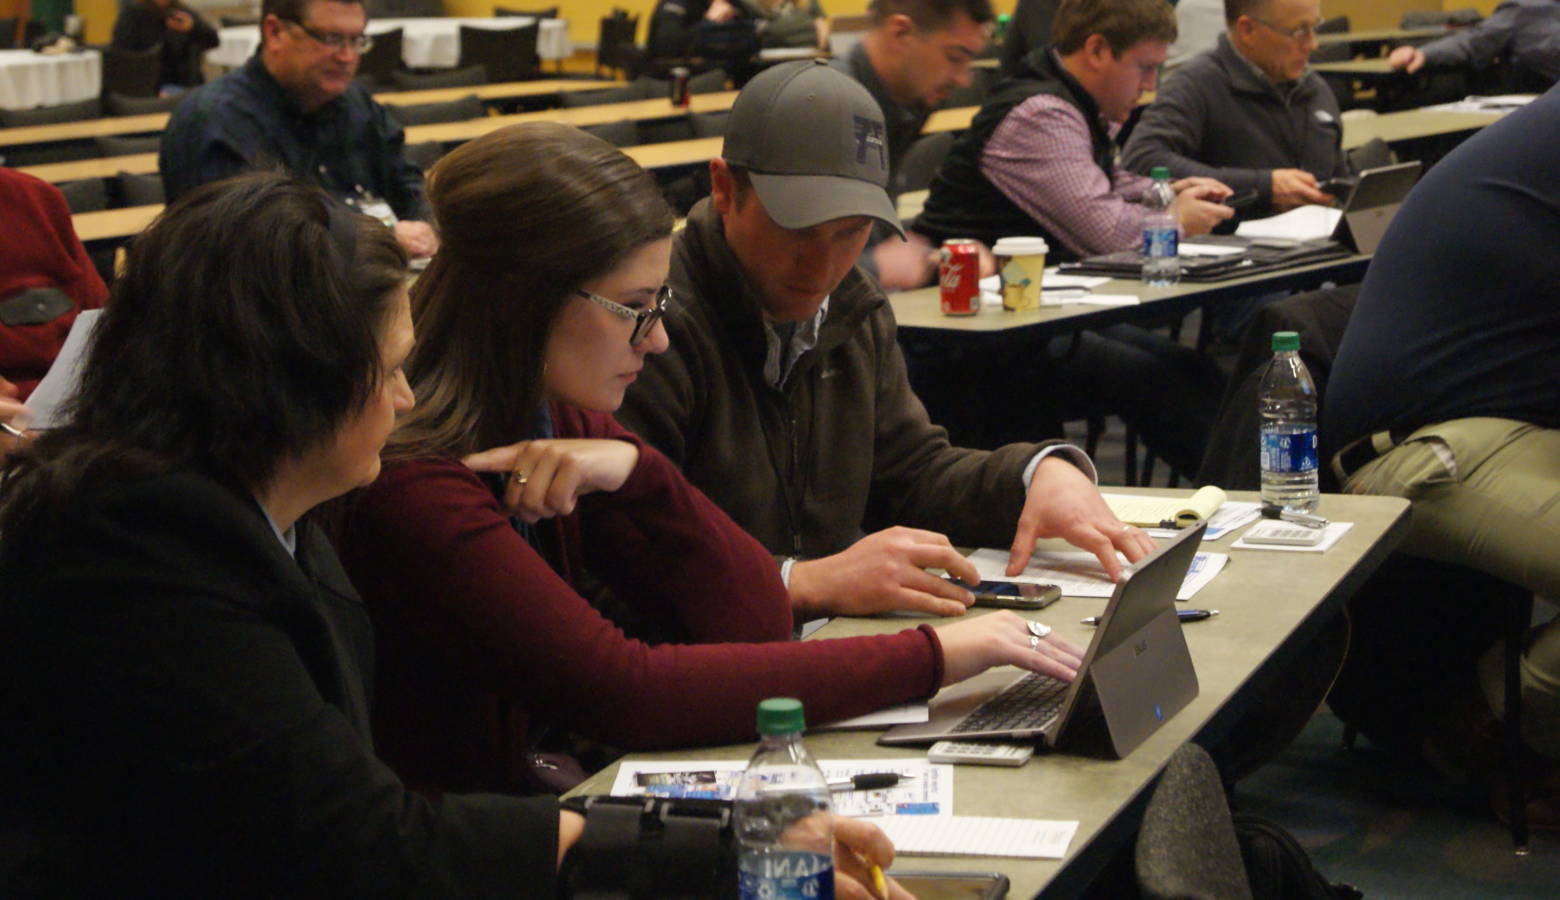 (Left to right) Kayla Holscher, Jenna Lansing and Andy Hruby work as a group during the Ag Survivor simulator activity at Purdue University's Top Farmer Conference. (Samantha Horton/IPB News)